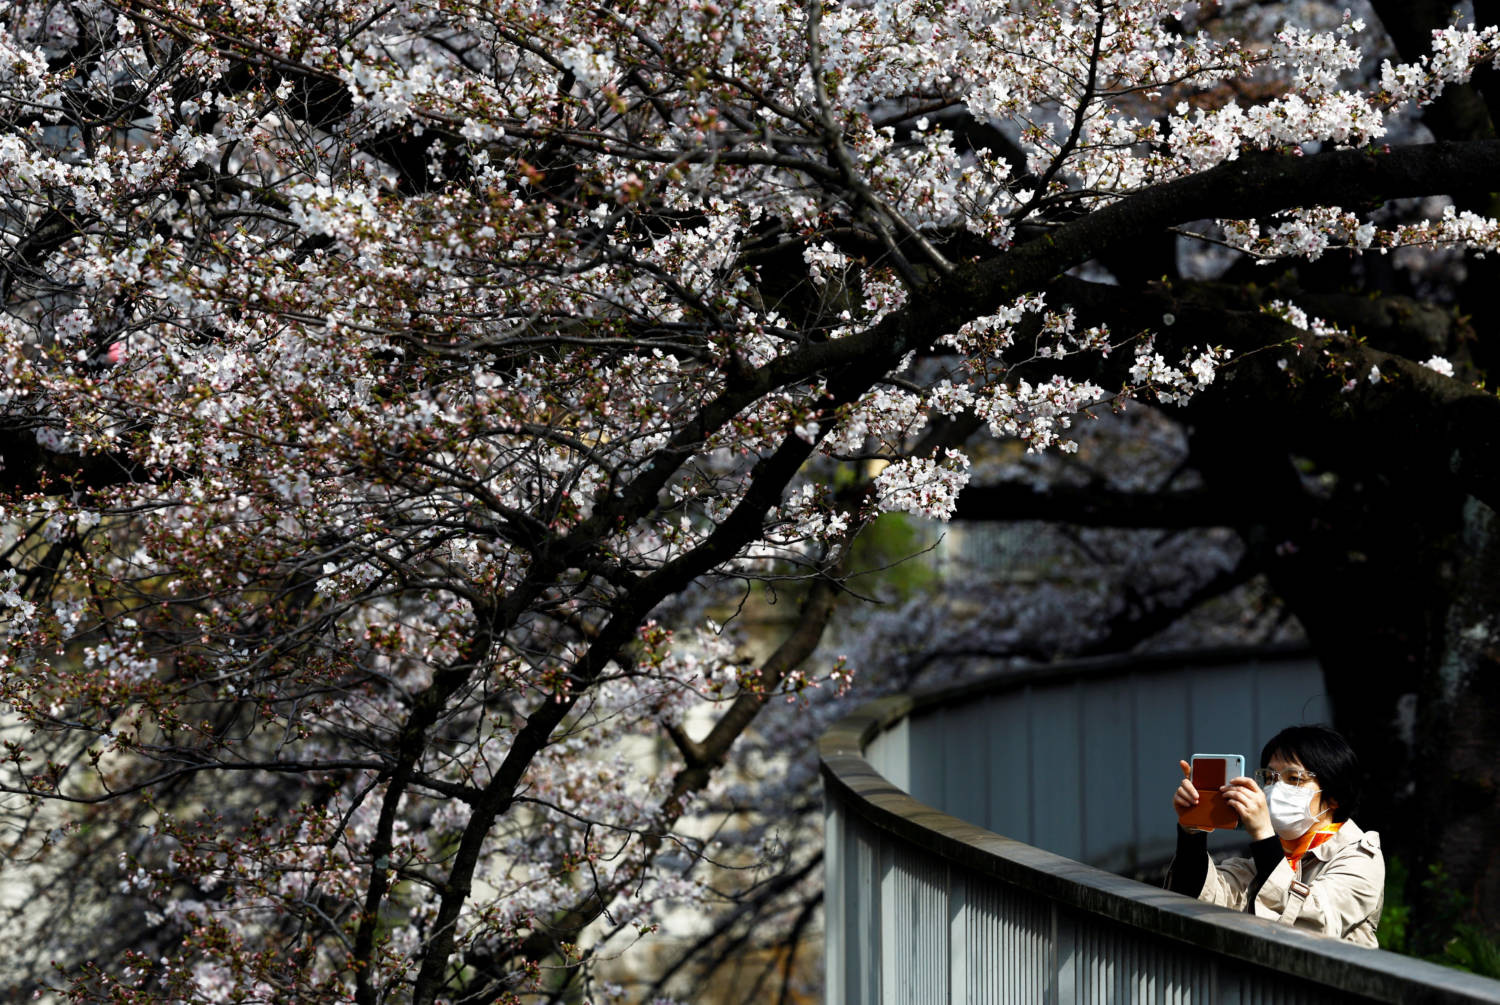 A Woman Takes A Photo On Her Smartphone Under Blooming Cherry Blossoms In Tokyo